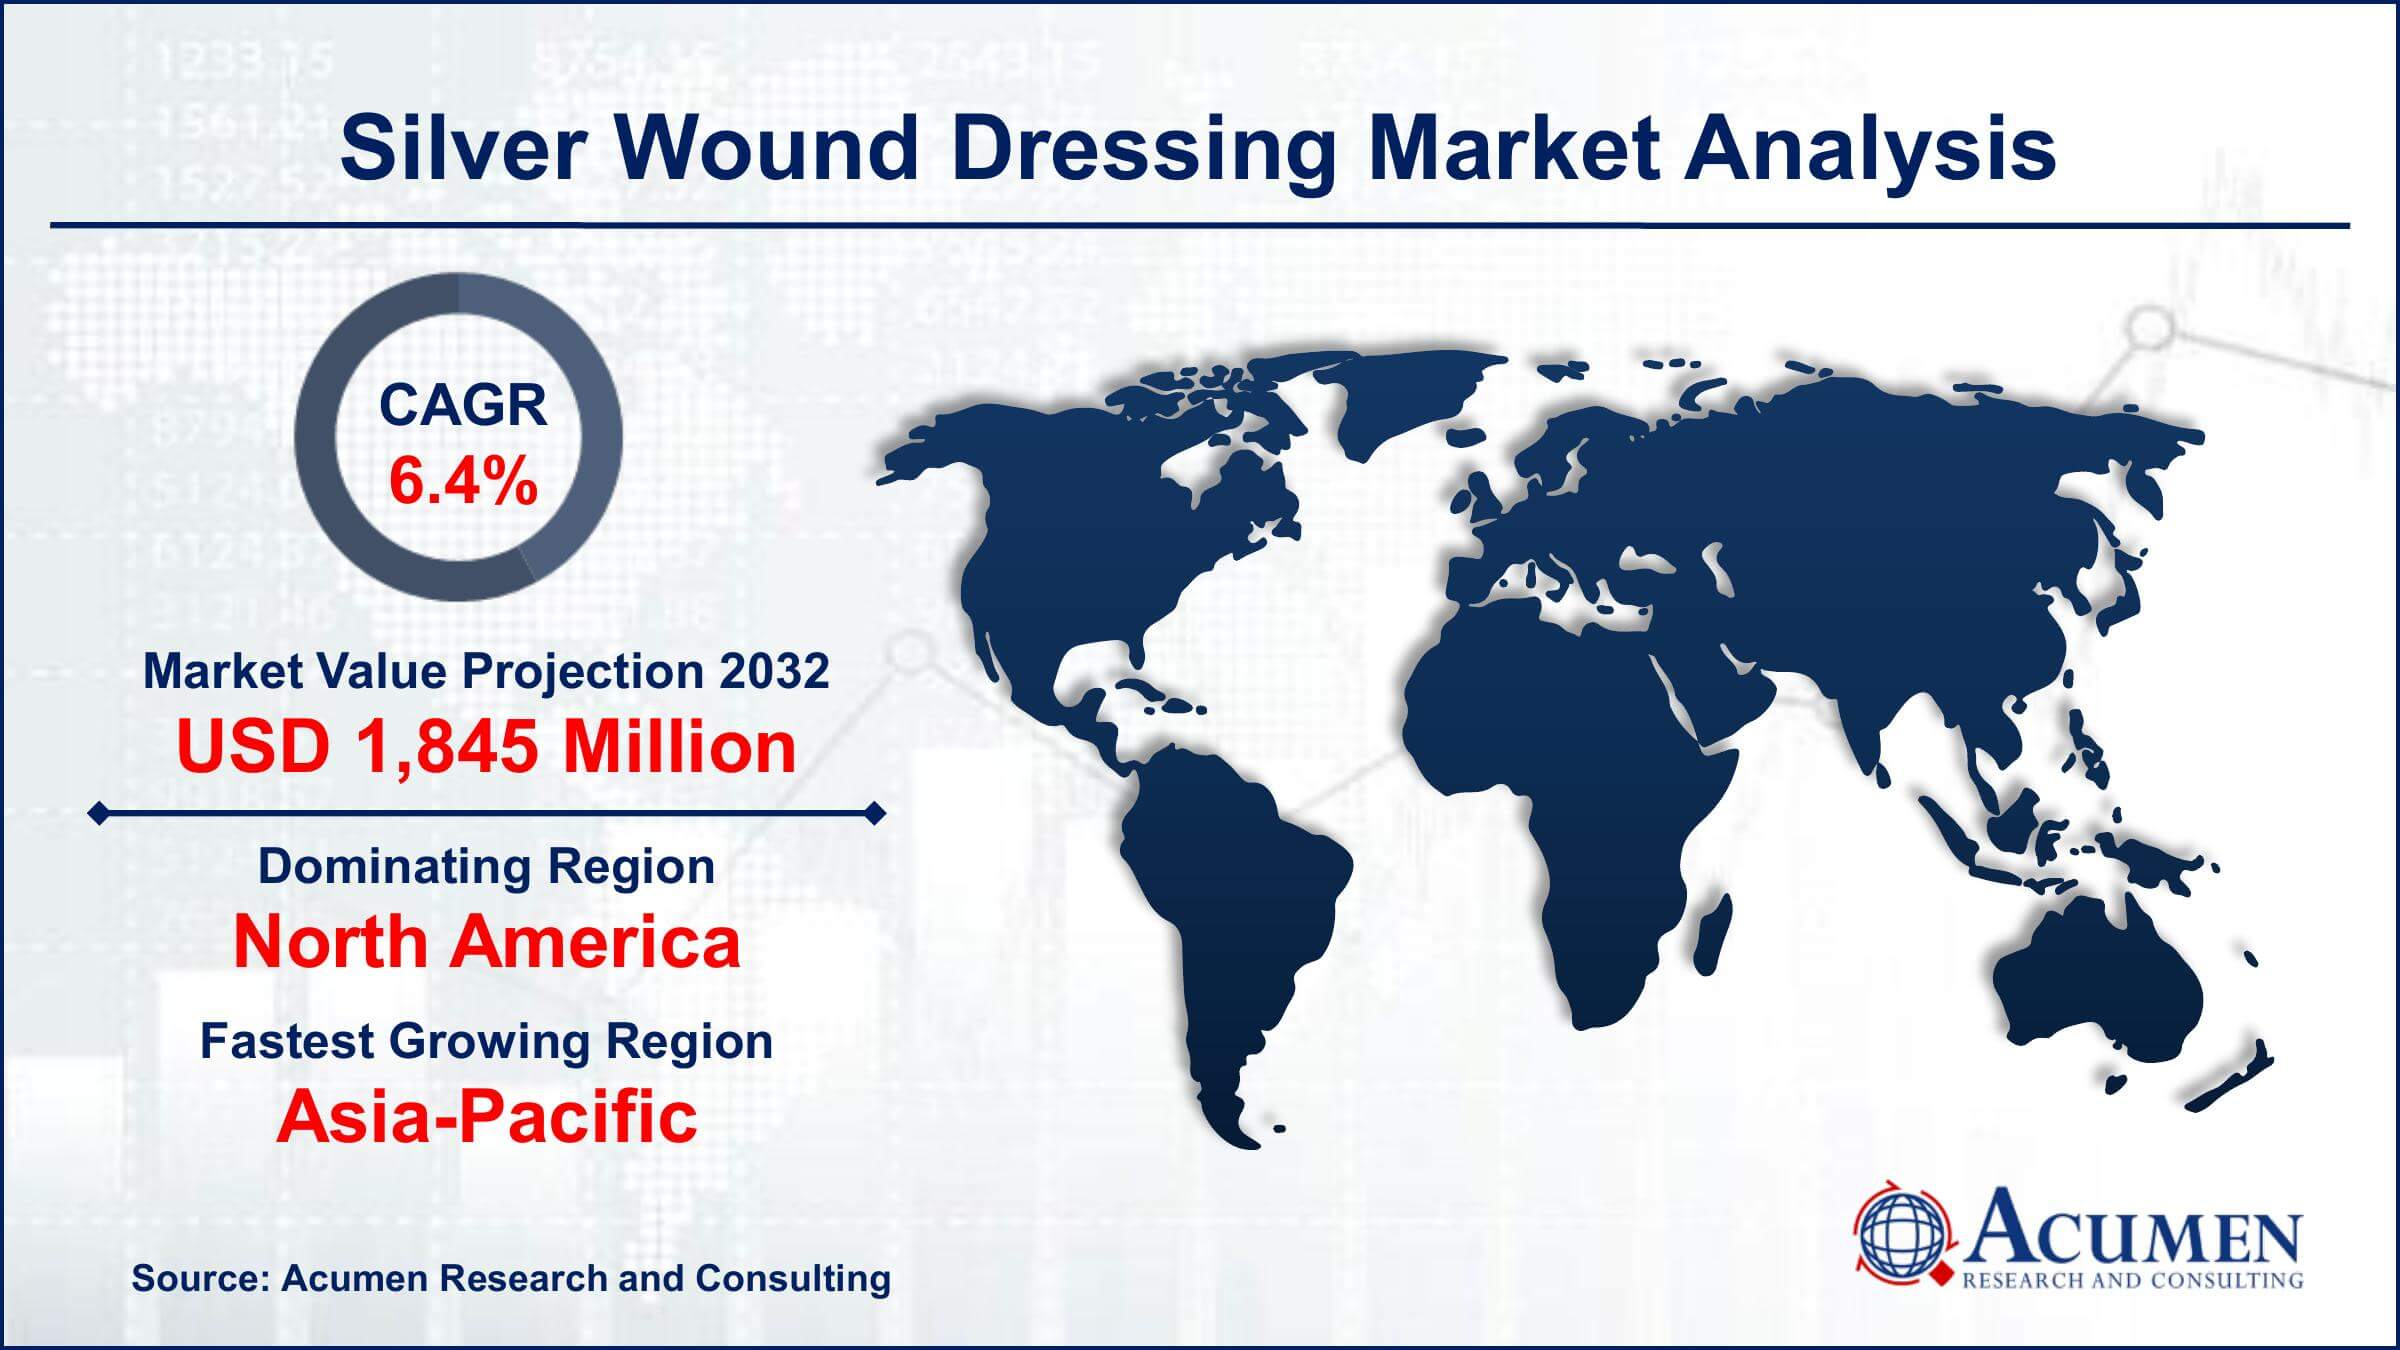 Global Silver Wound Dressing Market Trends